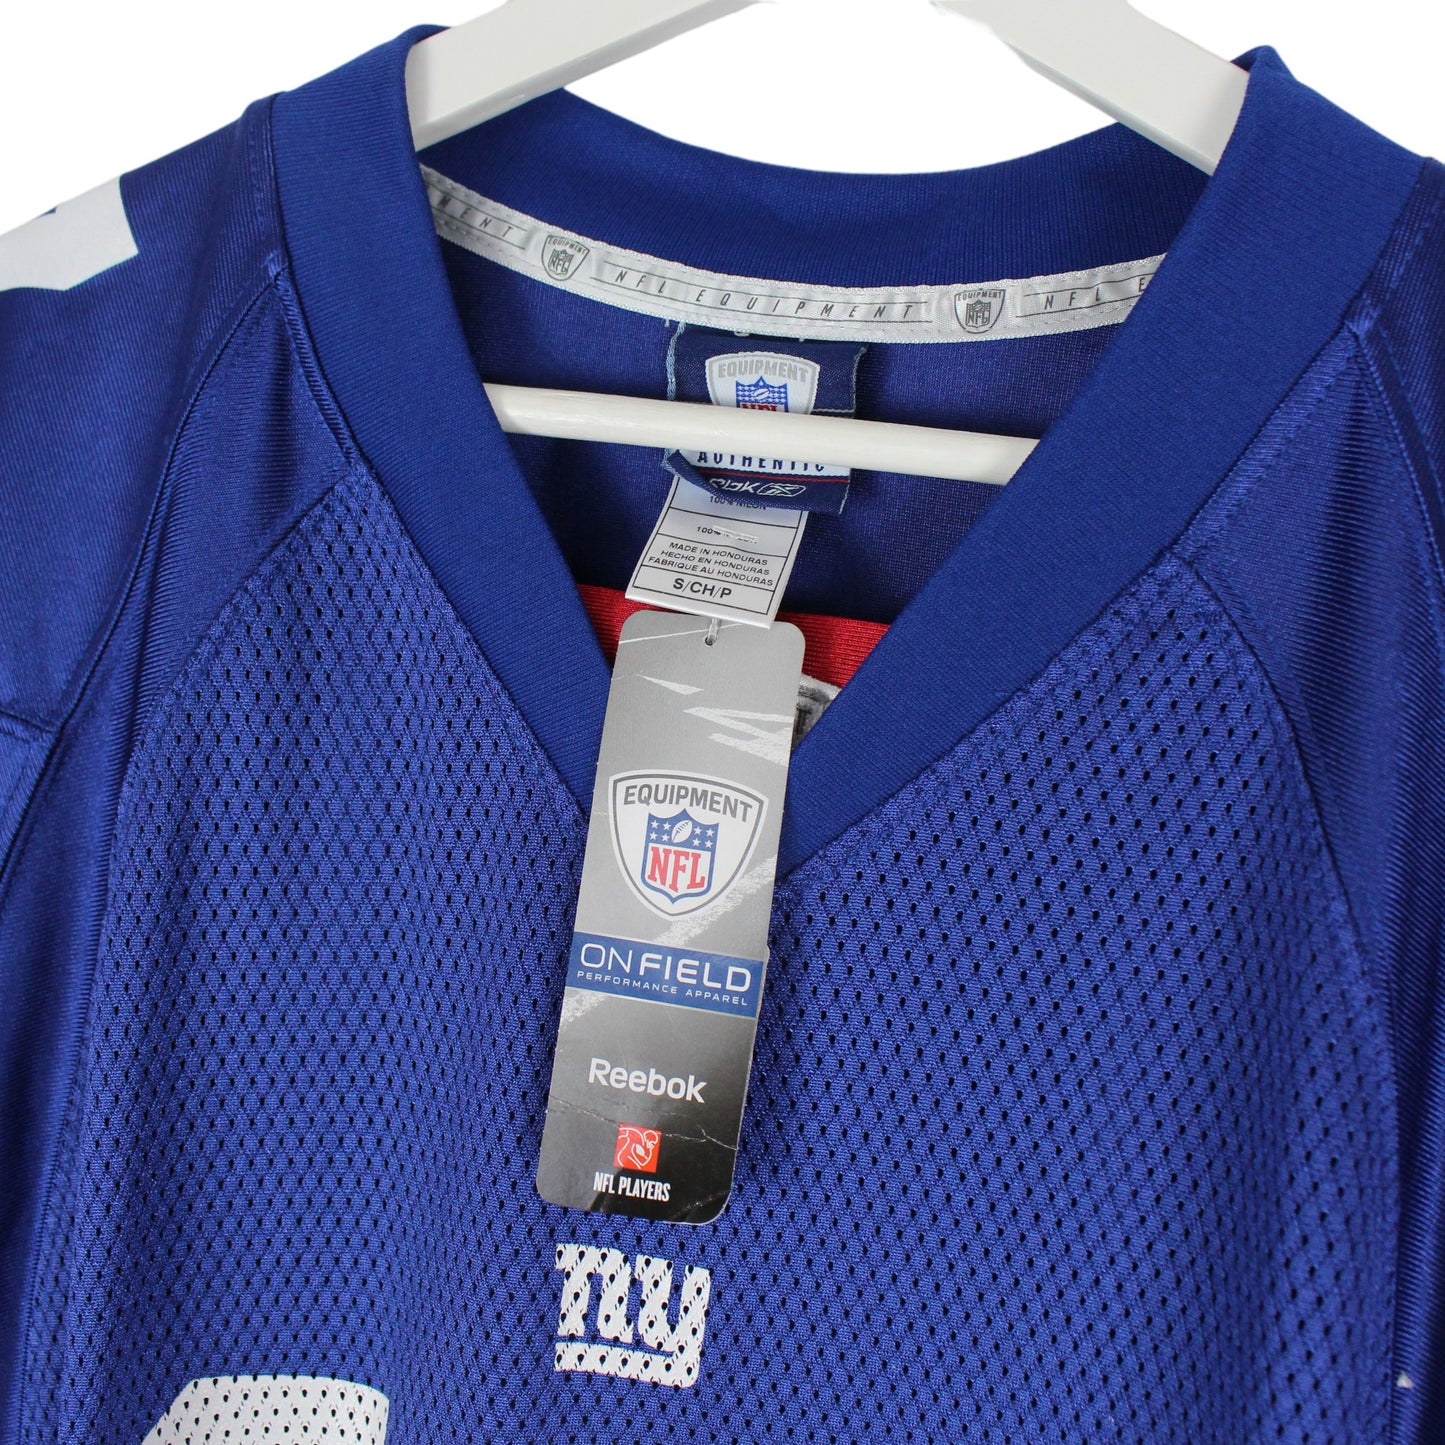 New York Giants Reebok Burres #17 Jersey New With Tags M)